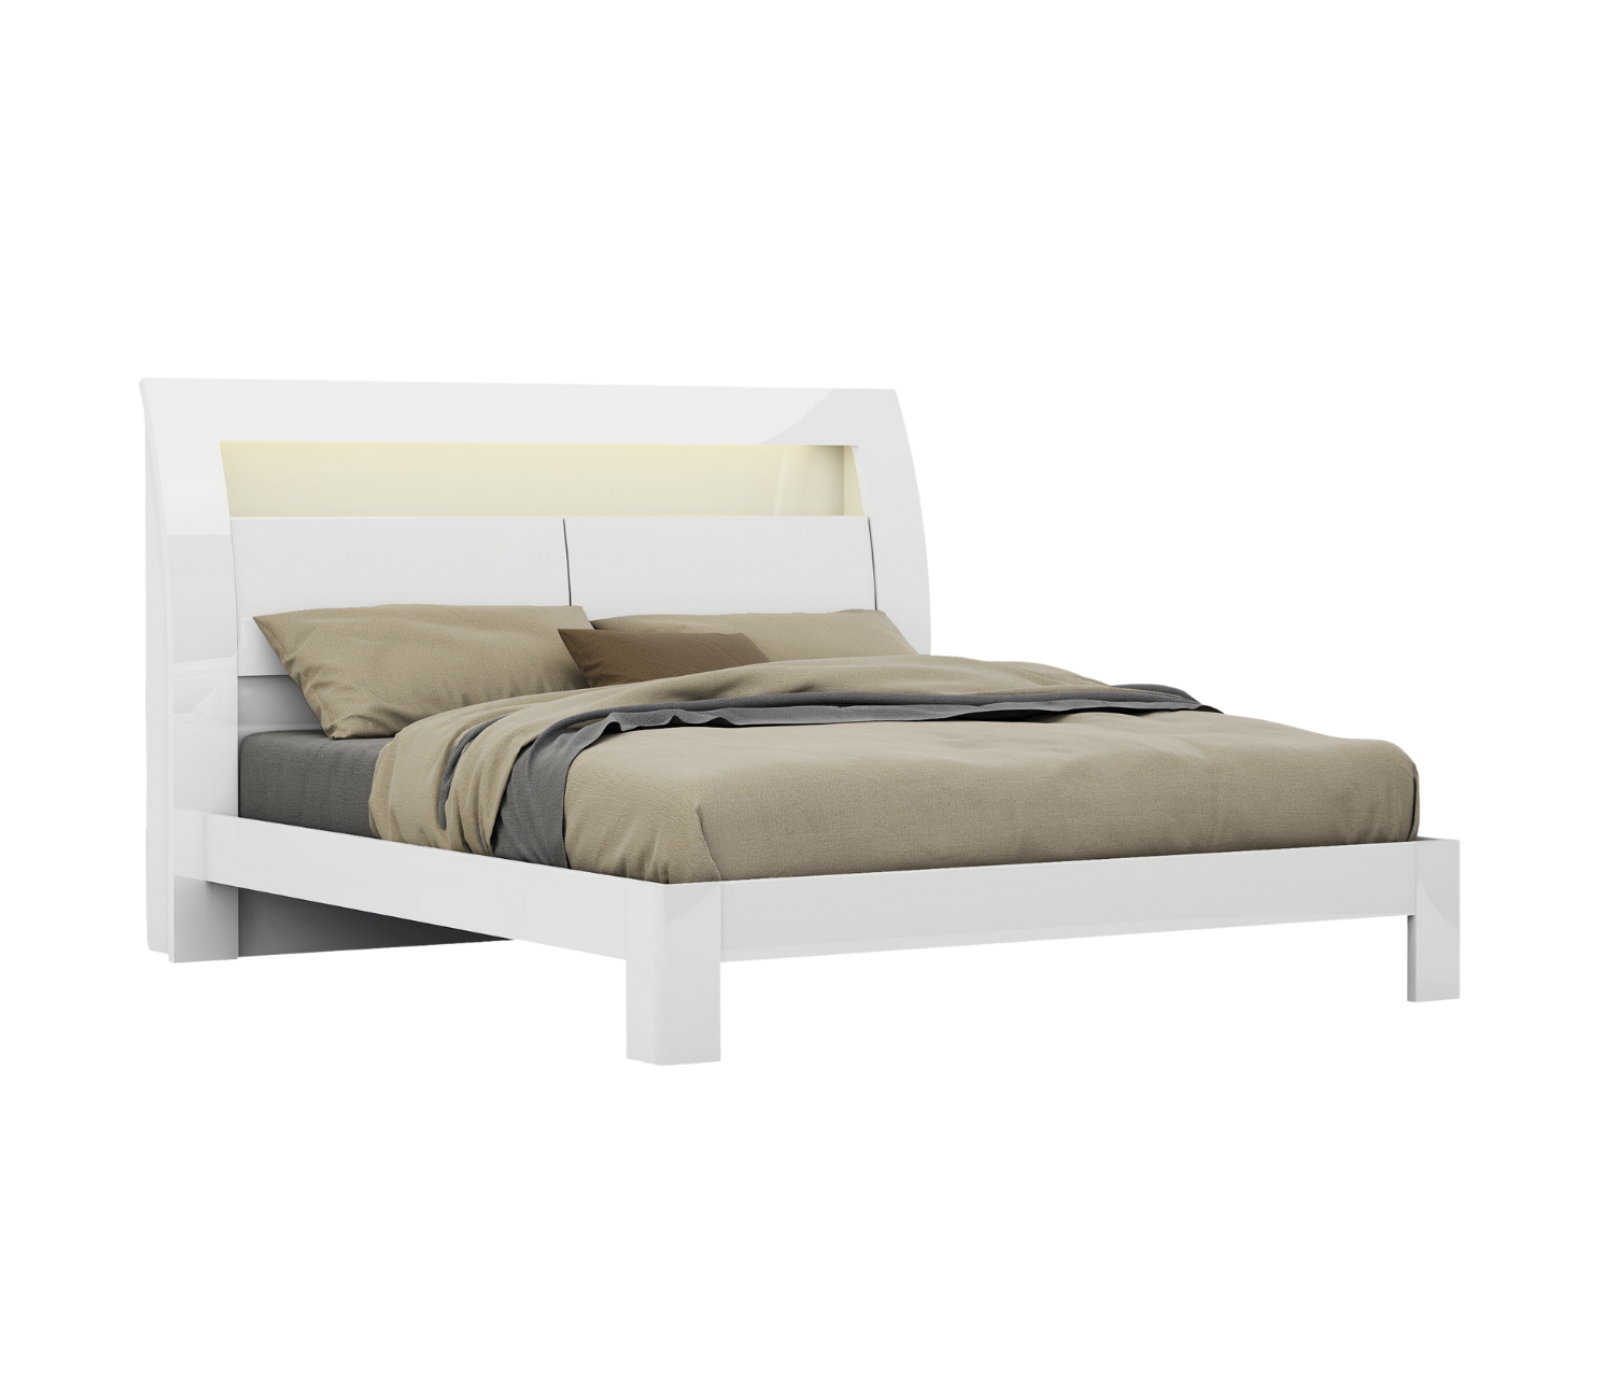 Cosmo 5 Piece King Bedroom - White